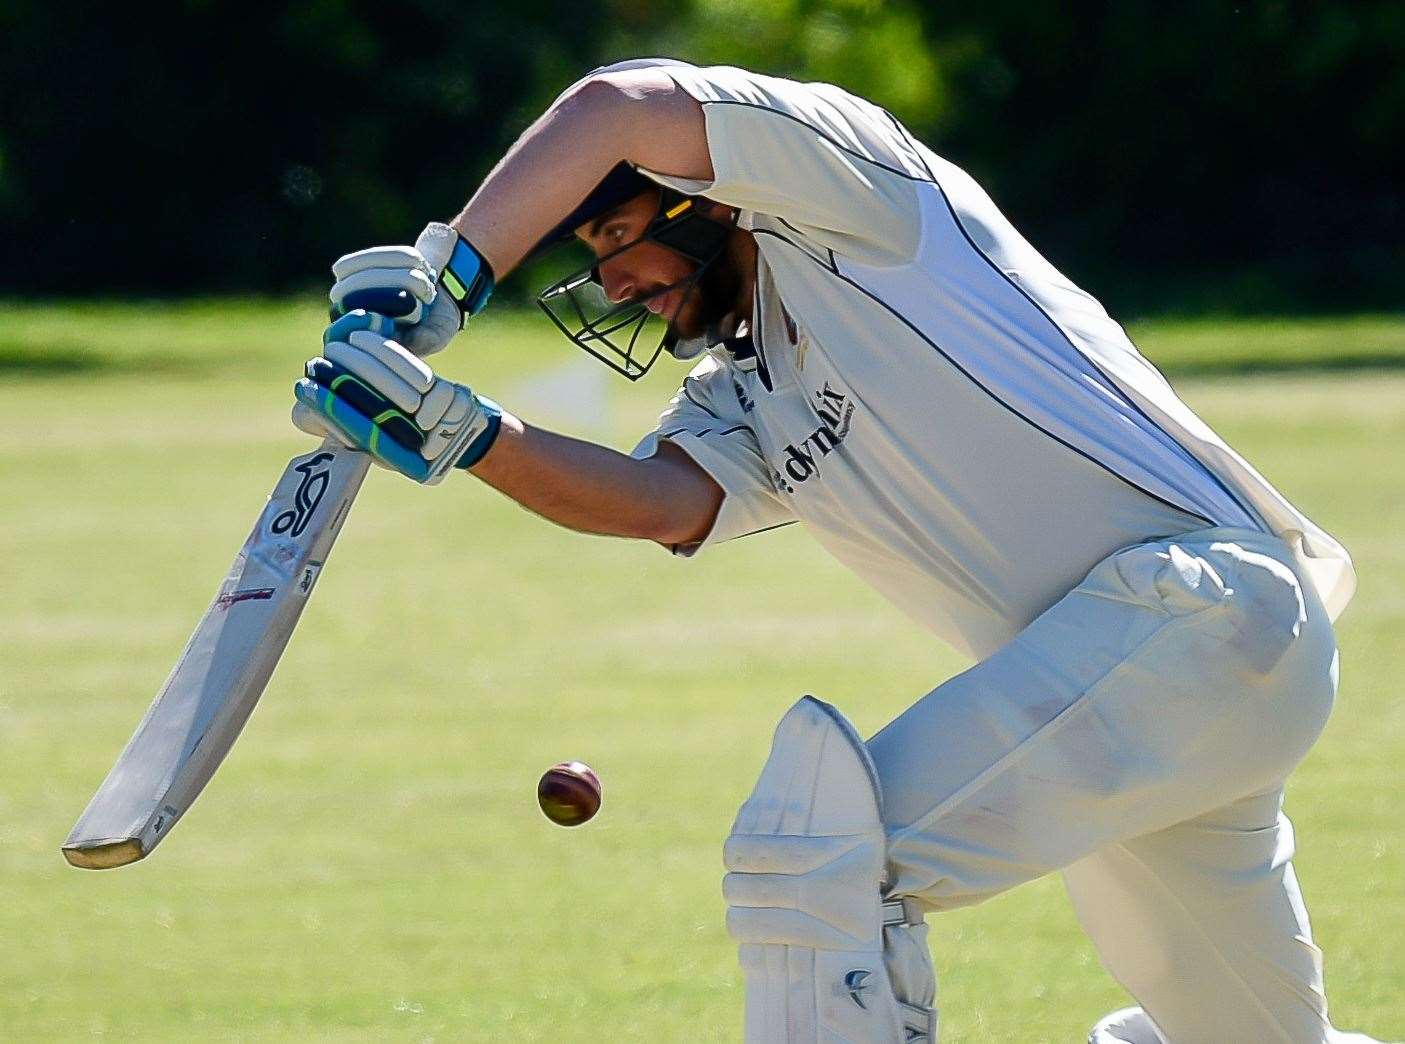 Sandwich Town's Zack Fagg scored another quickfire half-century as Sandwich Town beat Hayes. Picture: Alan Langley